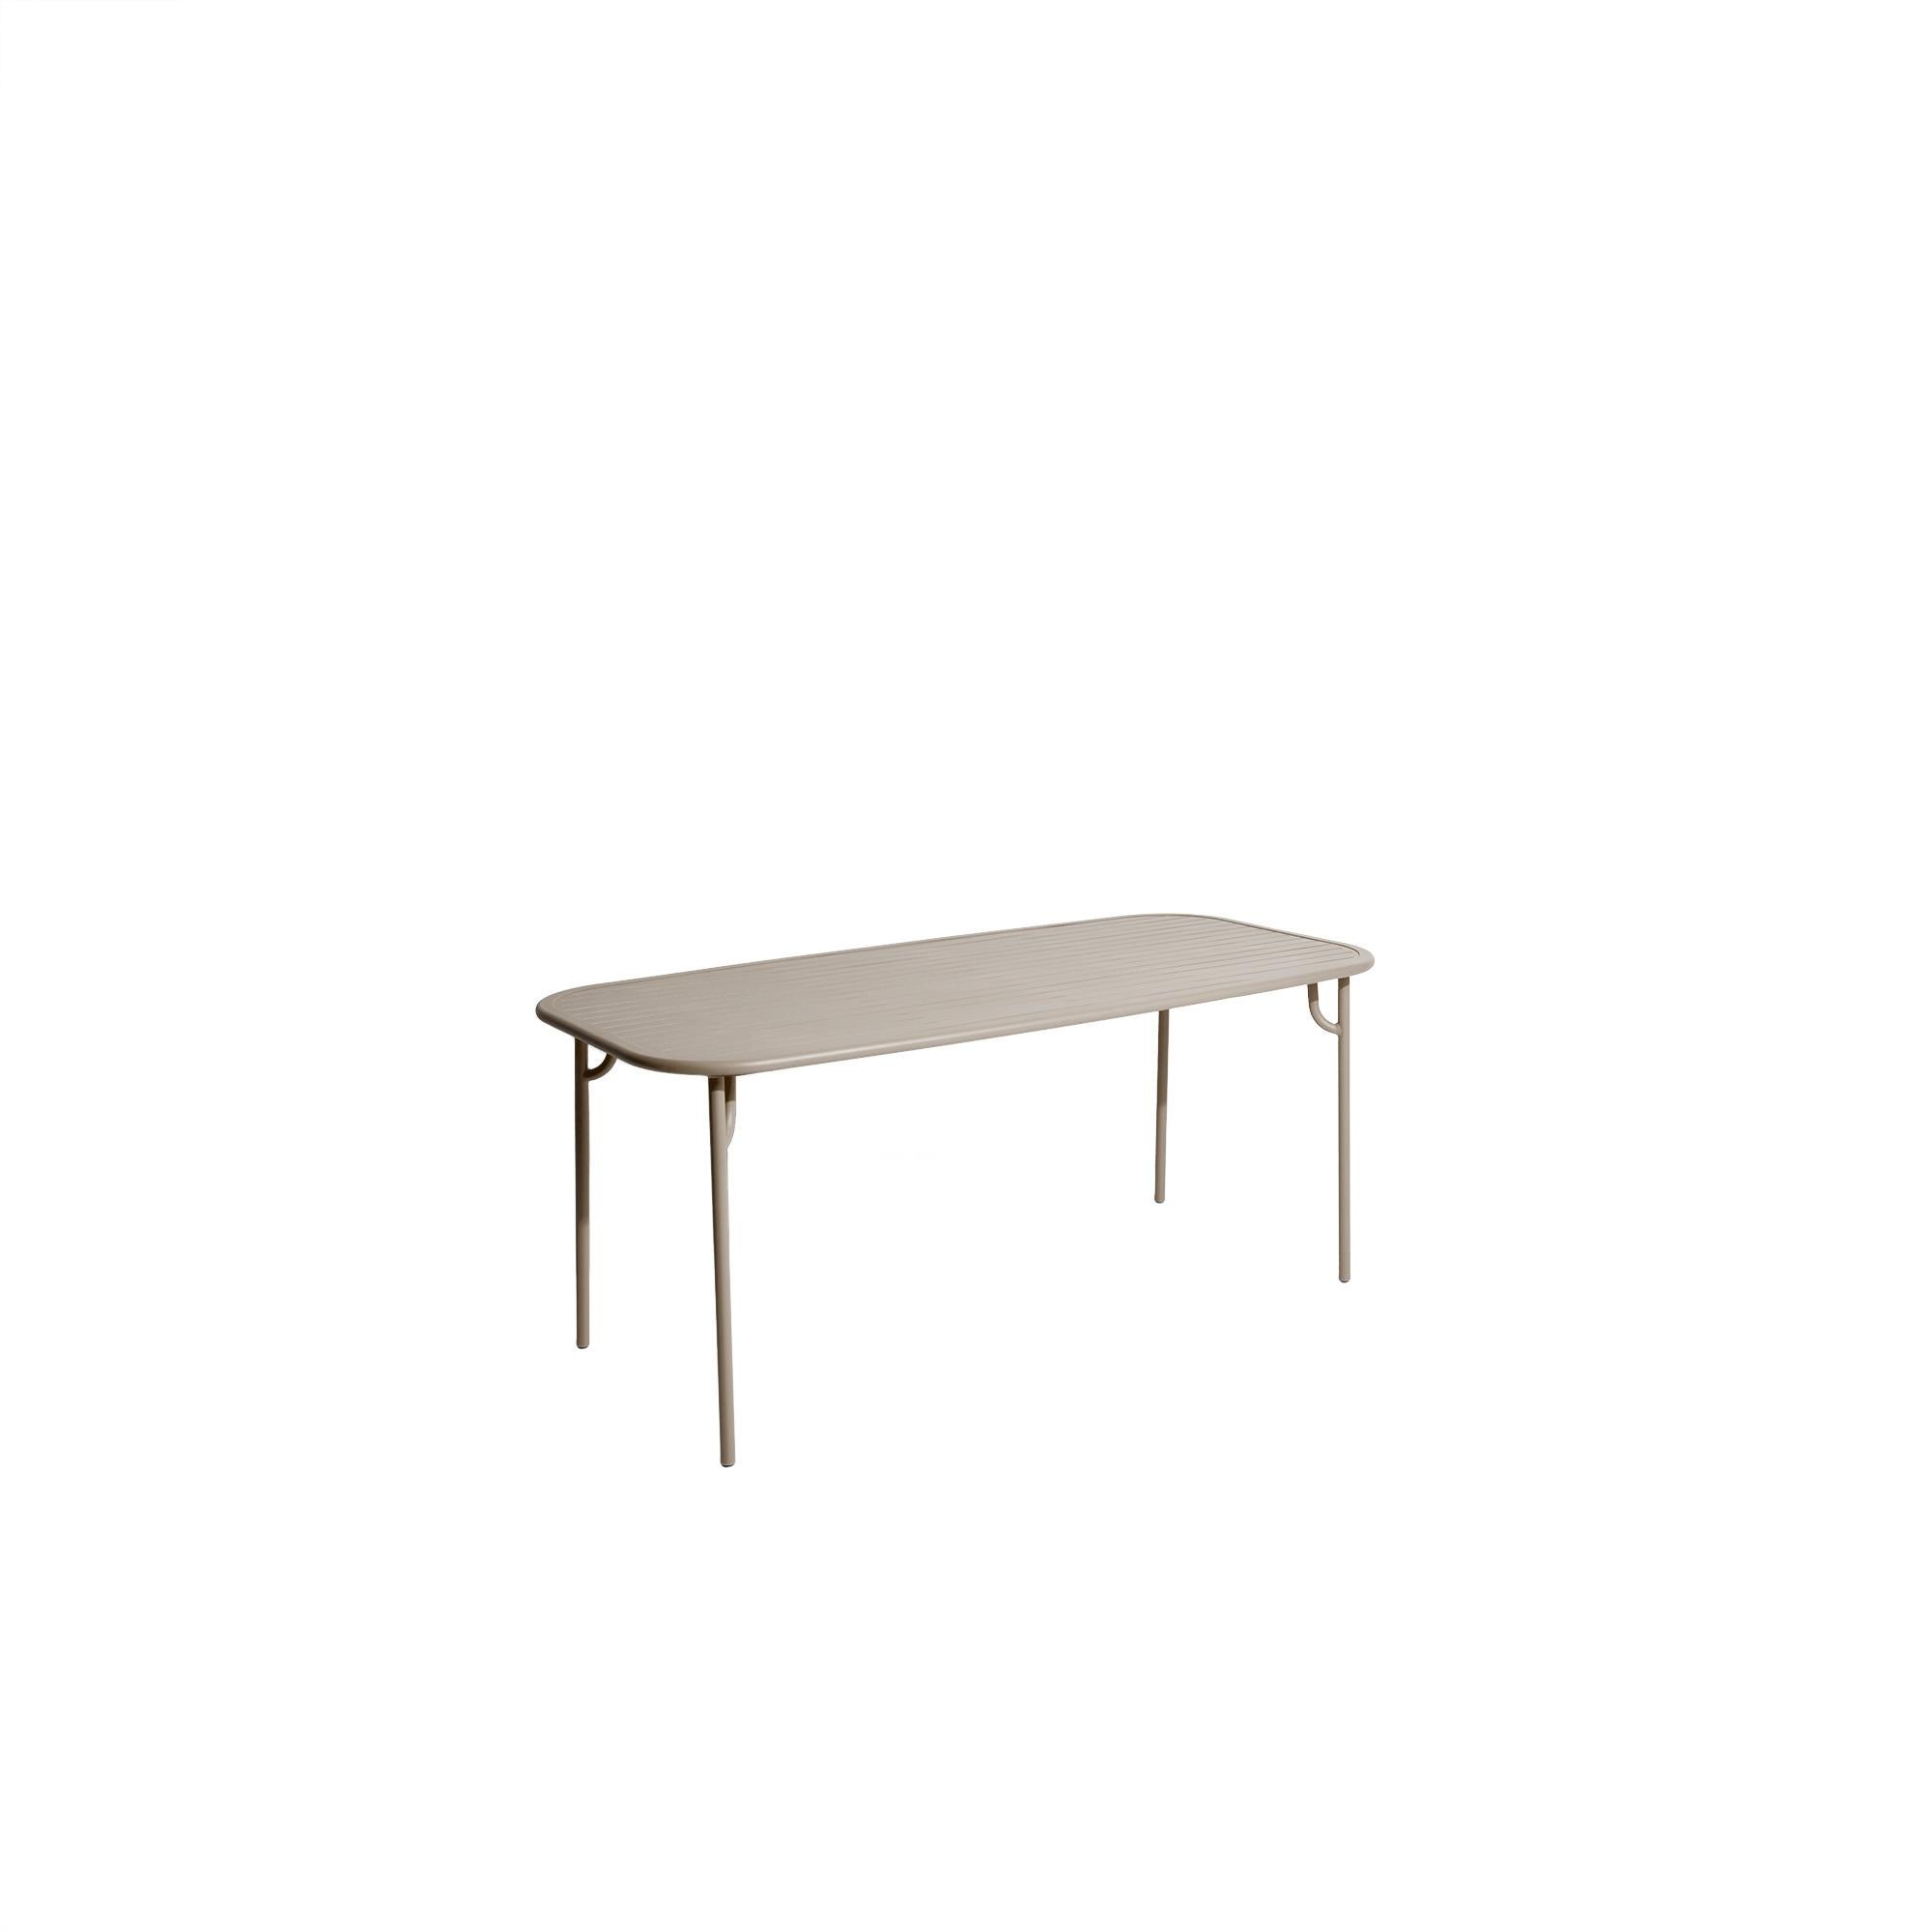 Petite Friture Week-End Medium Rectangular Dining Table in Dune Aluminium with Slats by Studio BrichetZiegler, 2017

The week-end collection is a full range of outdoor furniture, in aluminium grained epoxy paint, matt finish, that includes 18